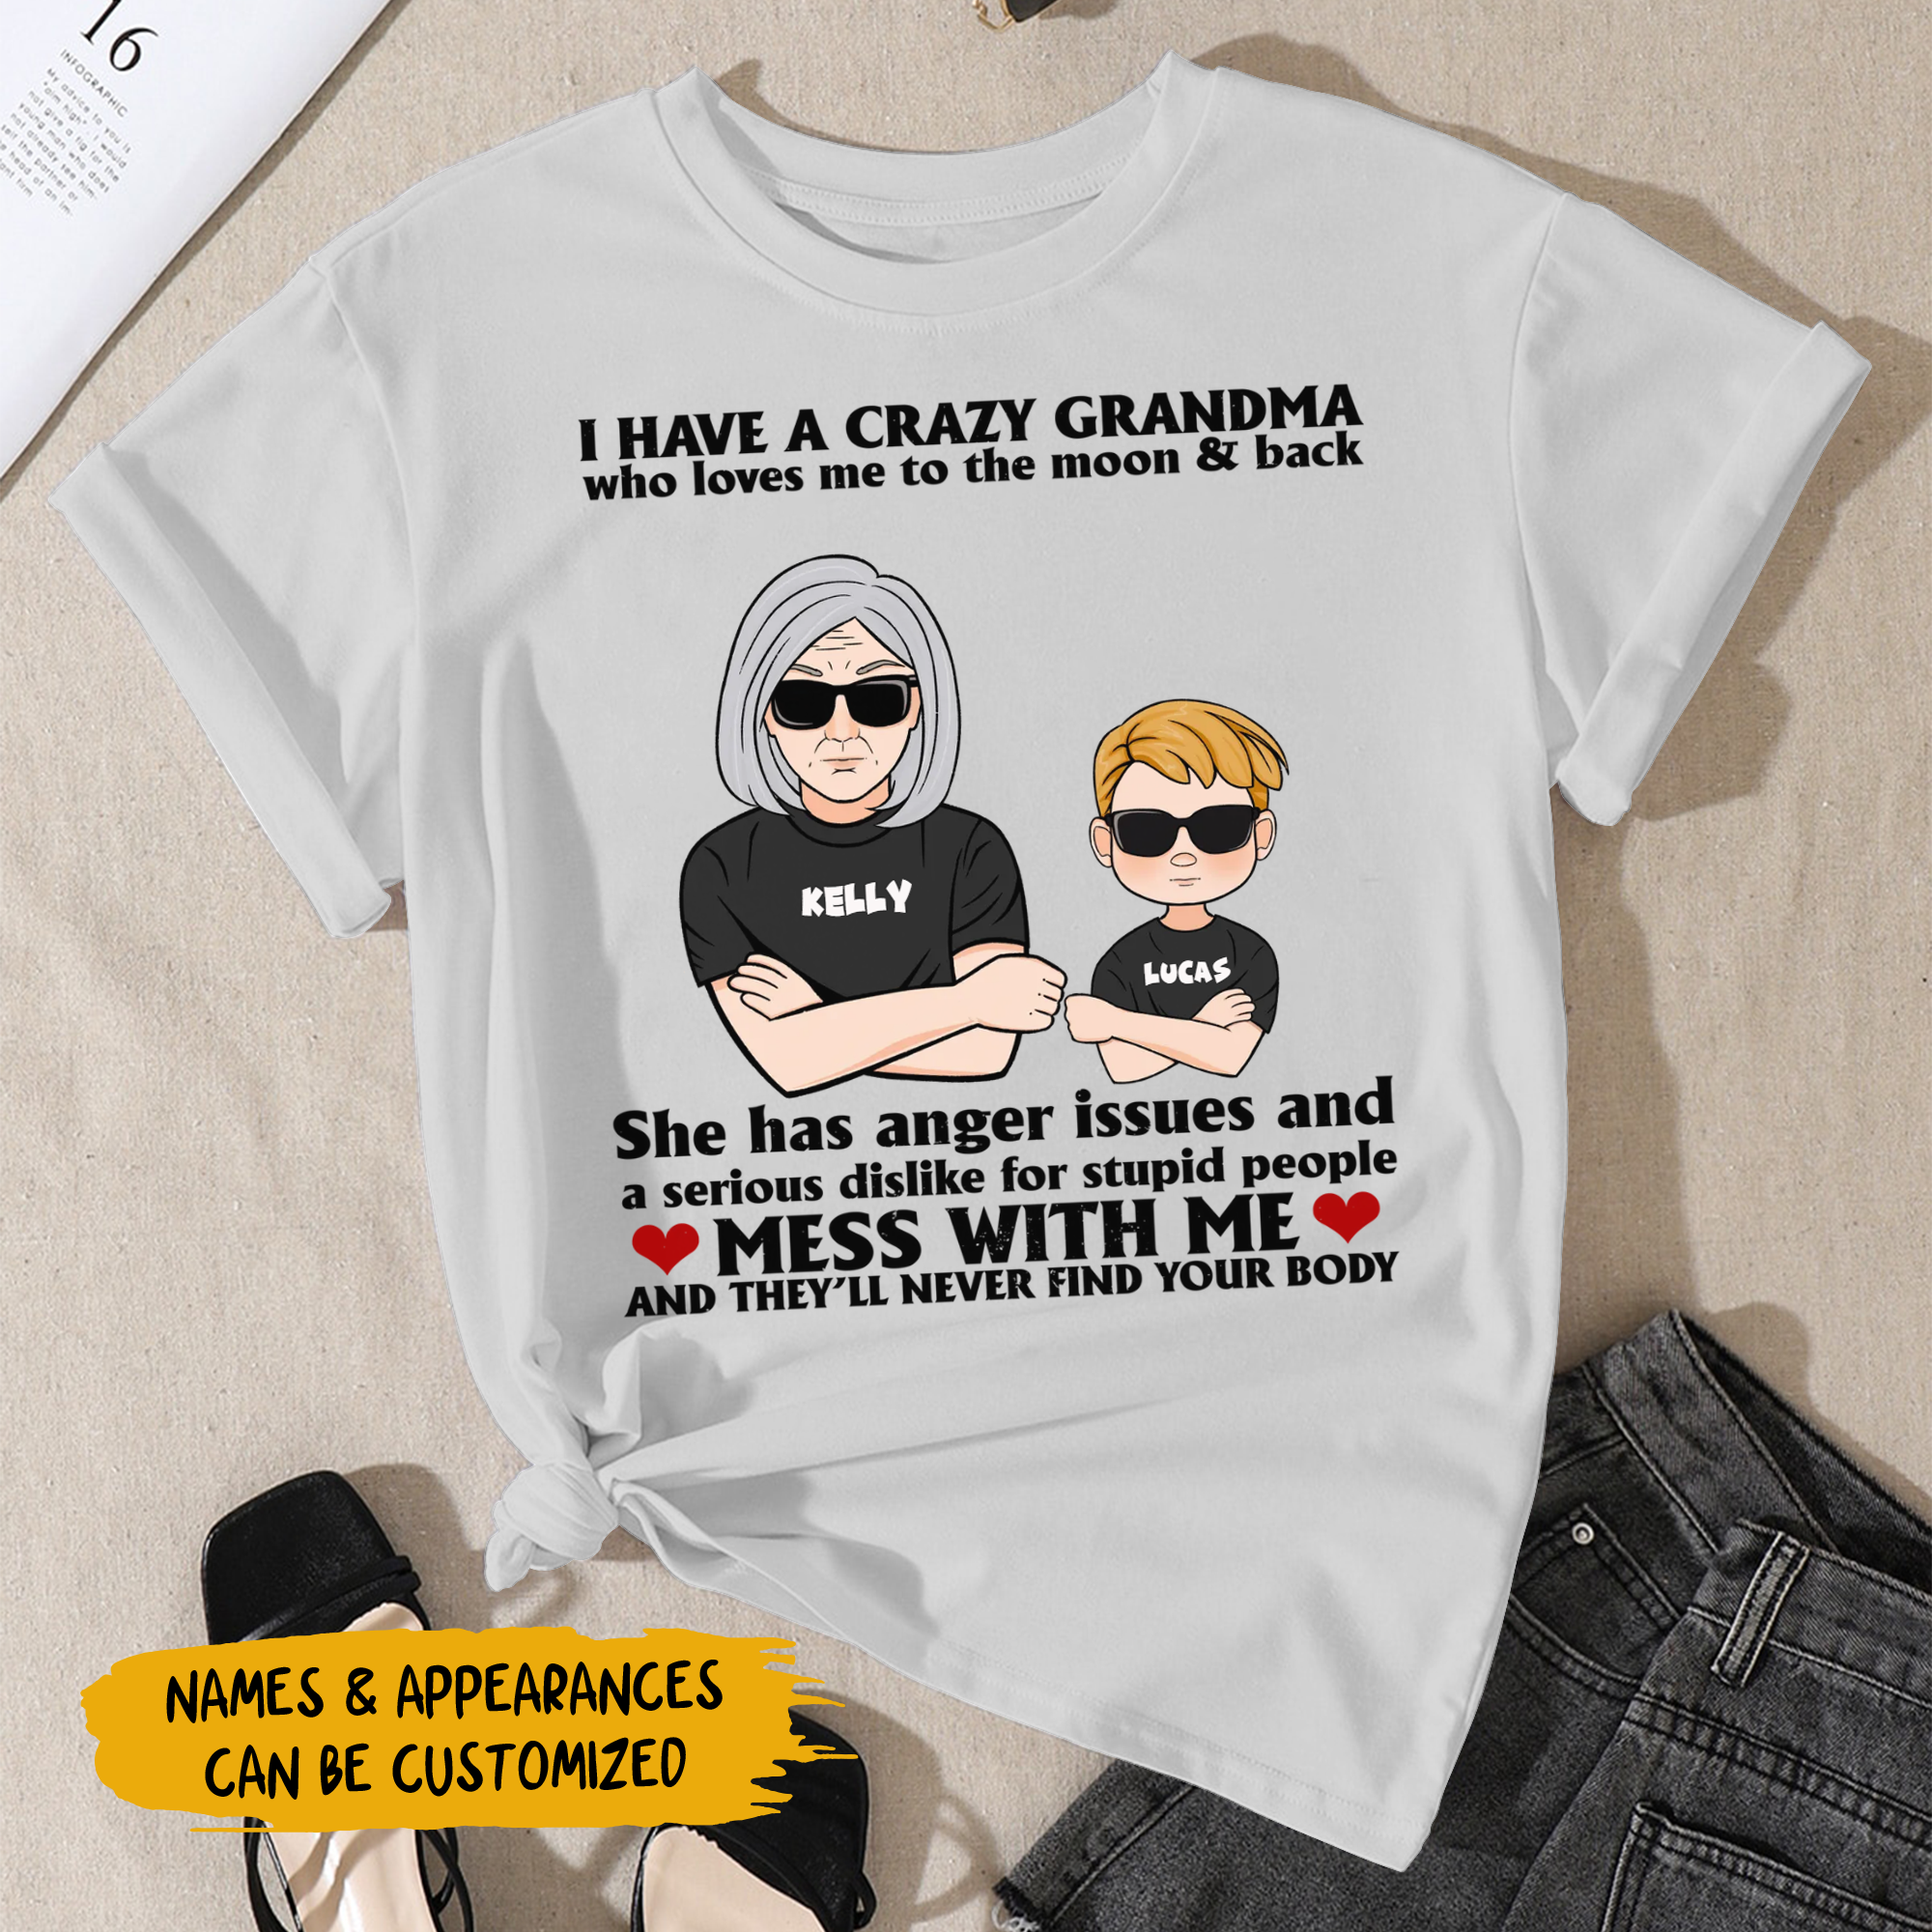 Personalized T-shirt - Gift For Grandma - I Have A Crazy Grandma Who Loves Me To The Moon And Back